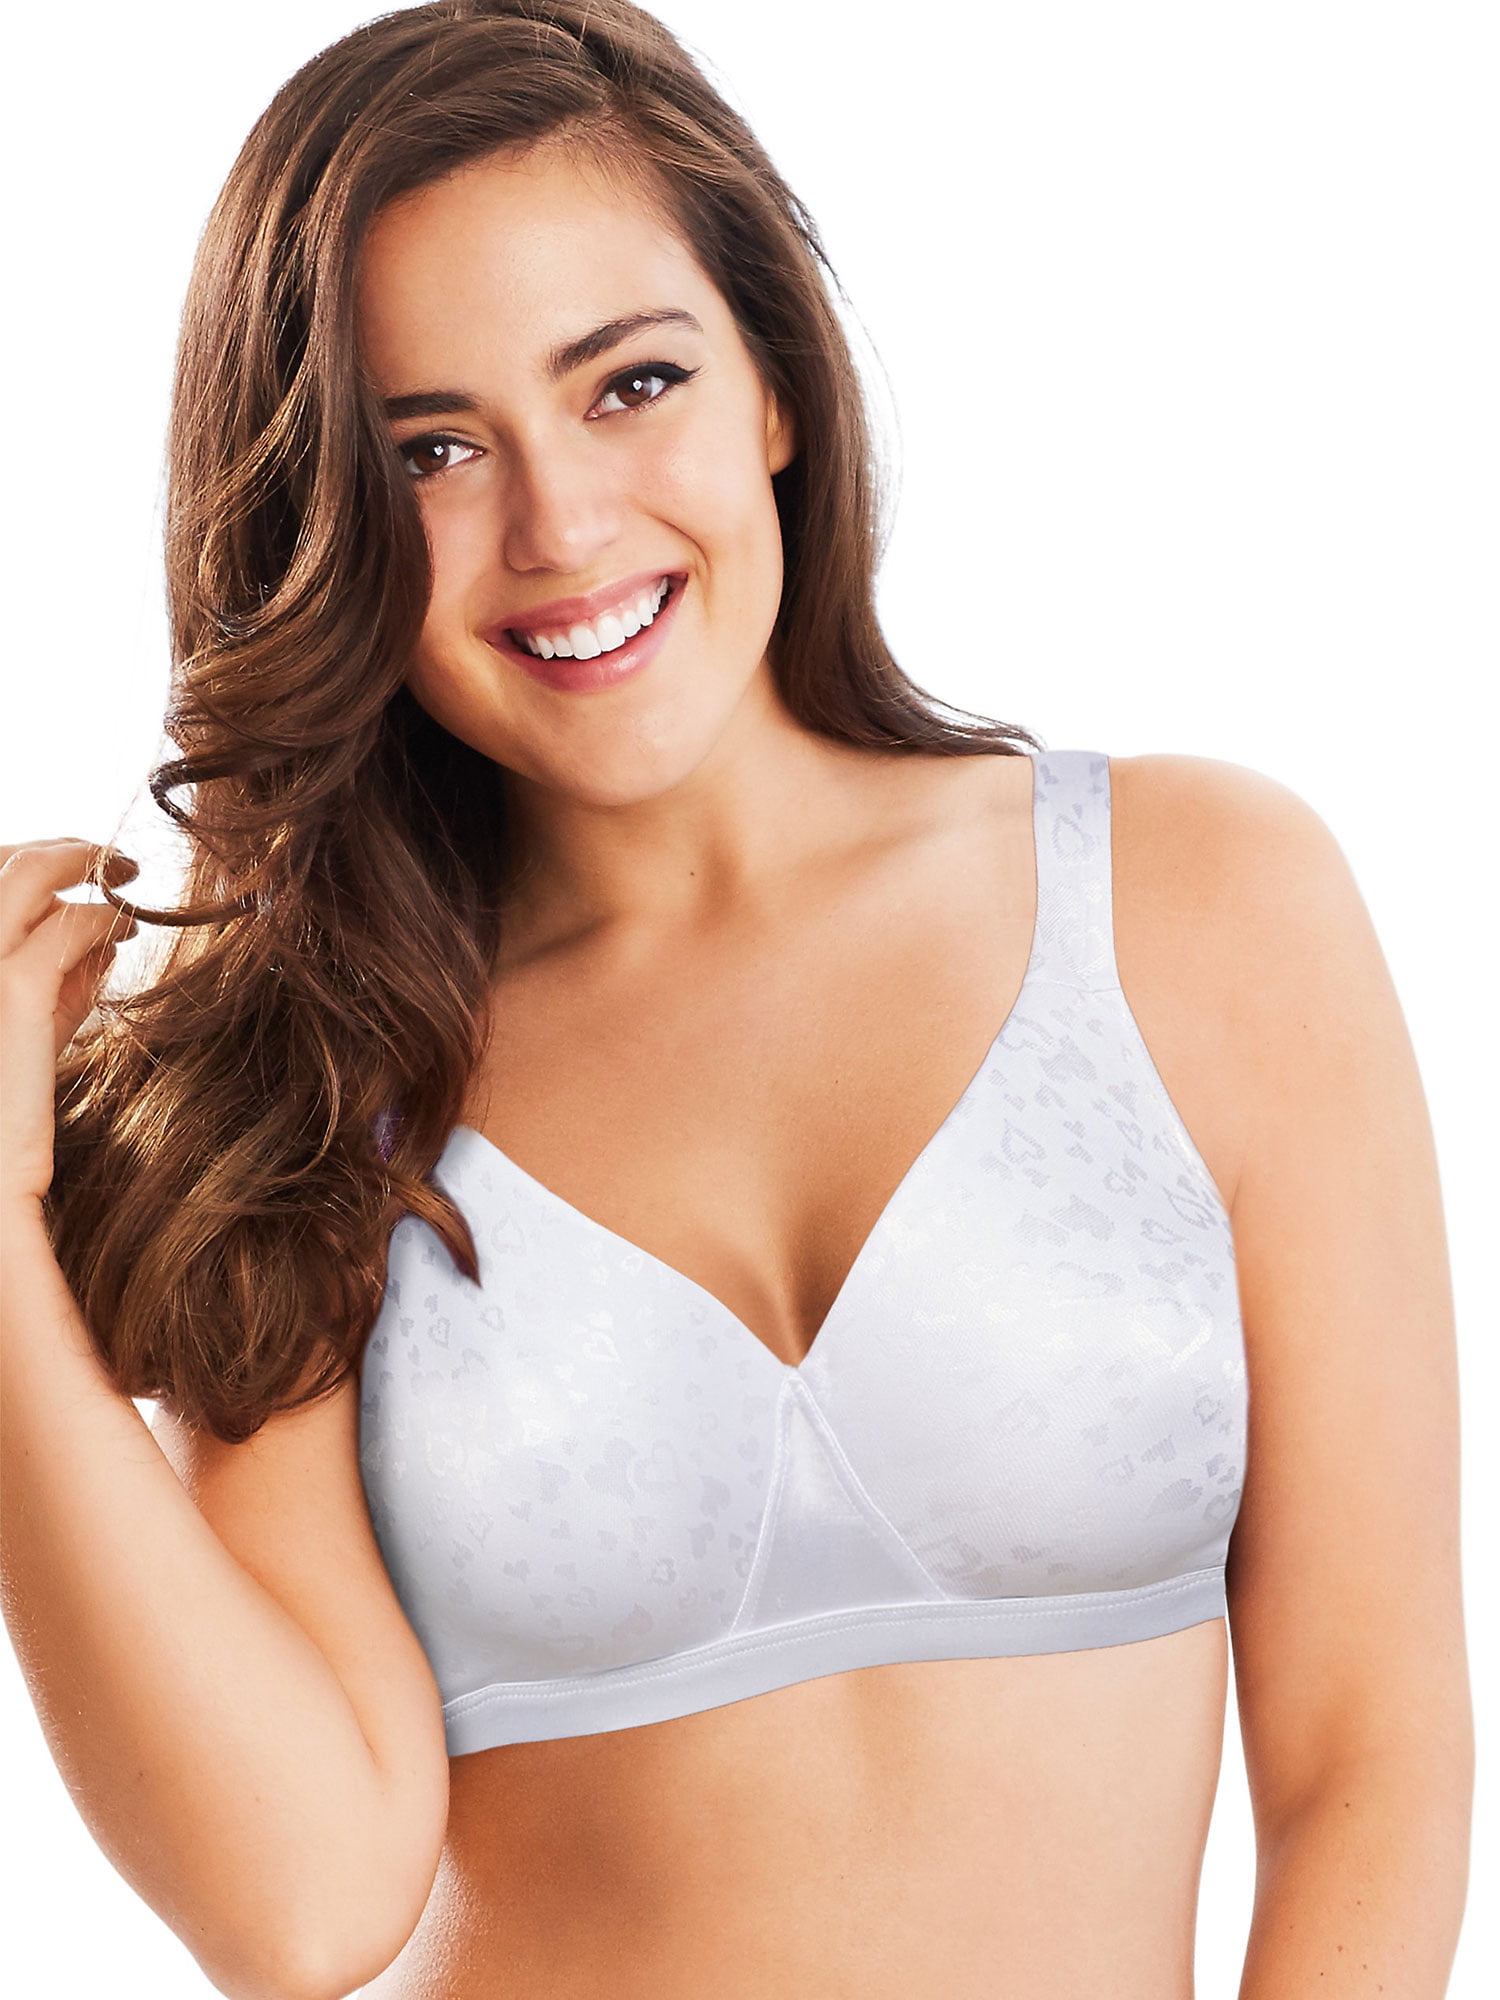 Playtex WHITE Cross Your Heart Stretch Foam-Lined Wirefree Bra, US